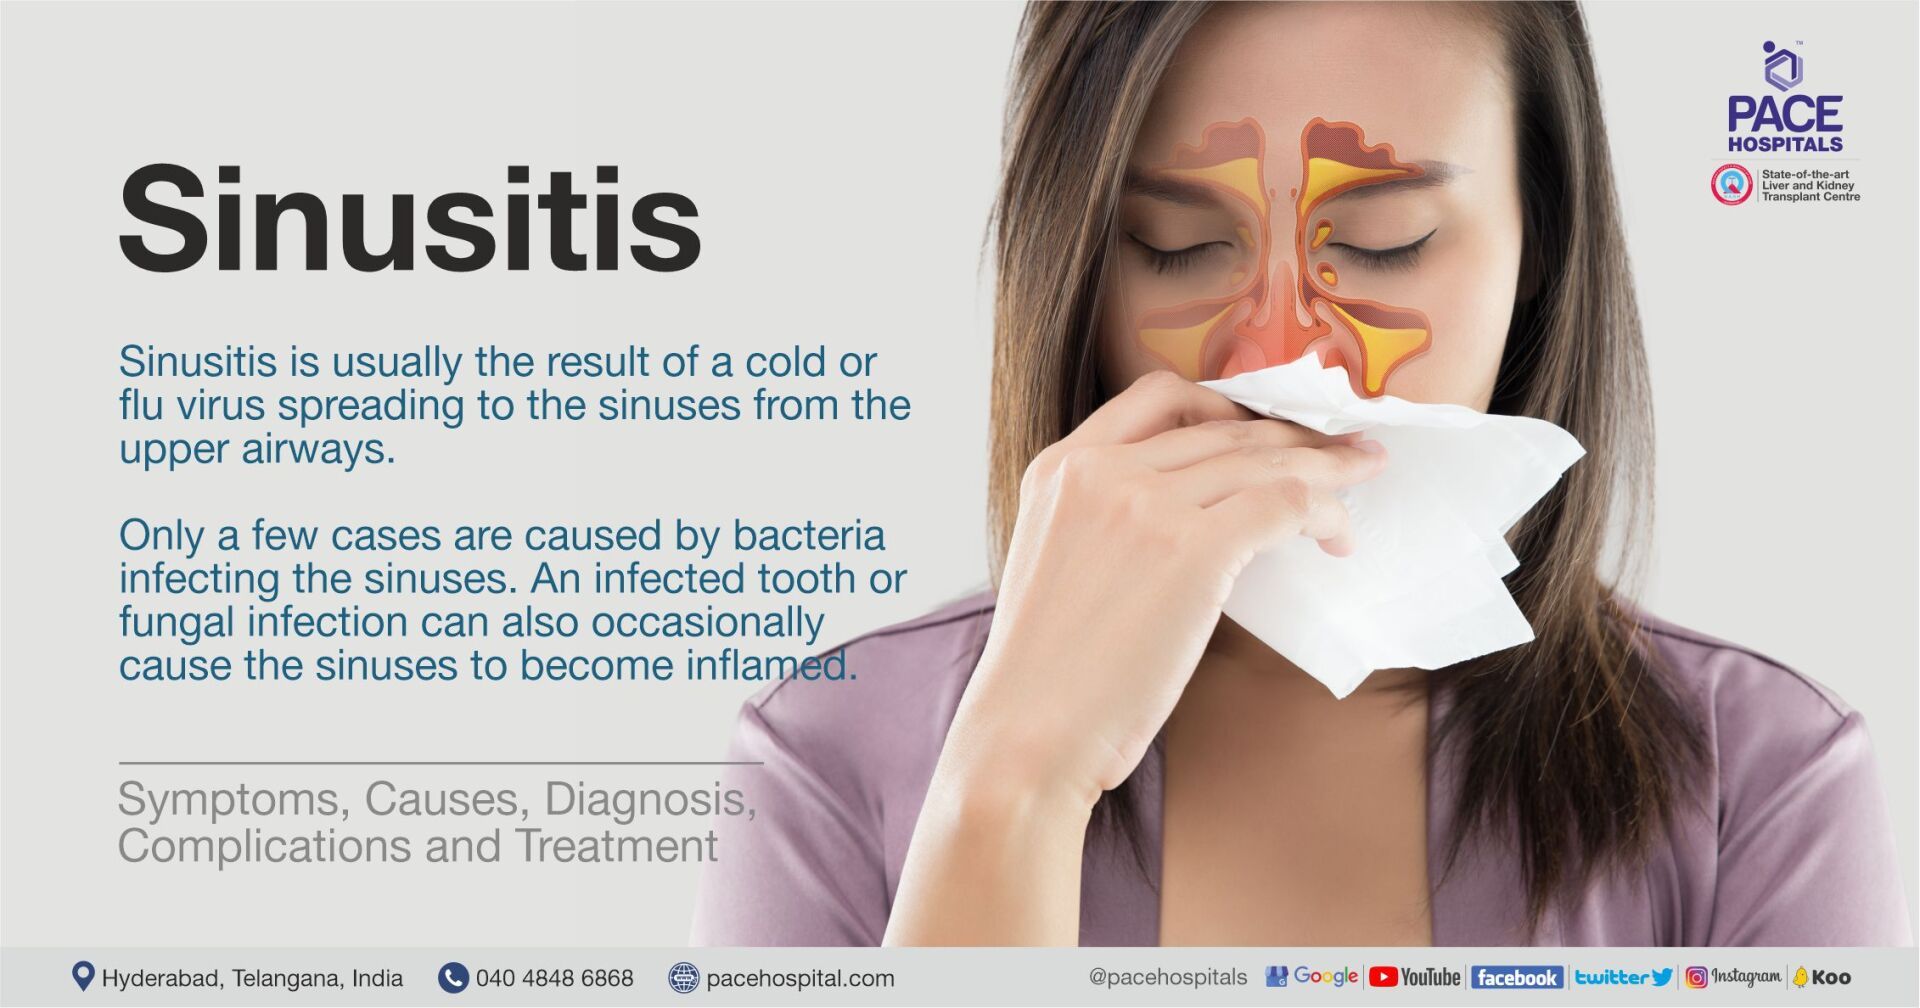 online visit for sinus infection